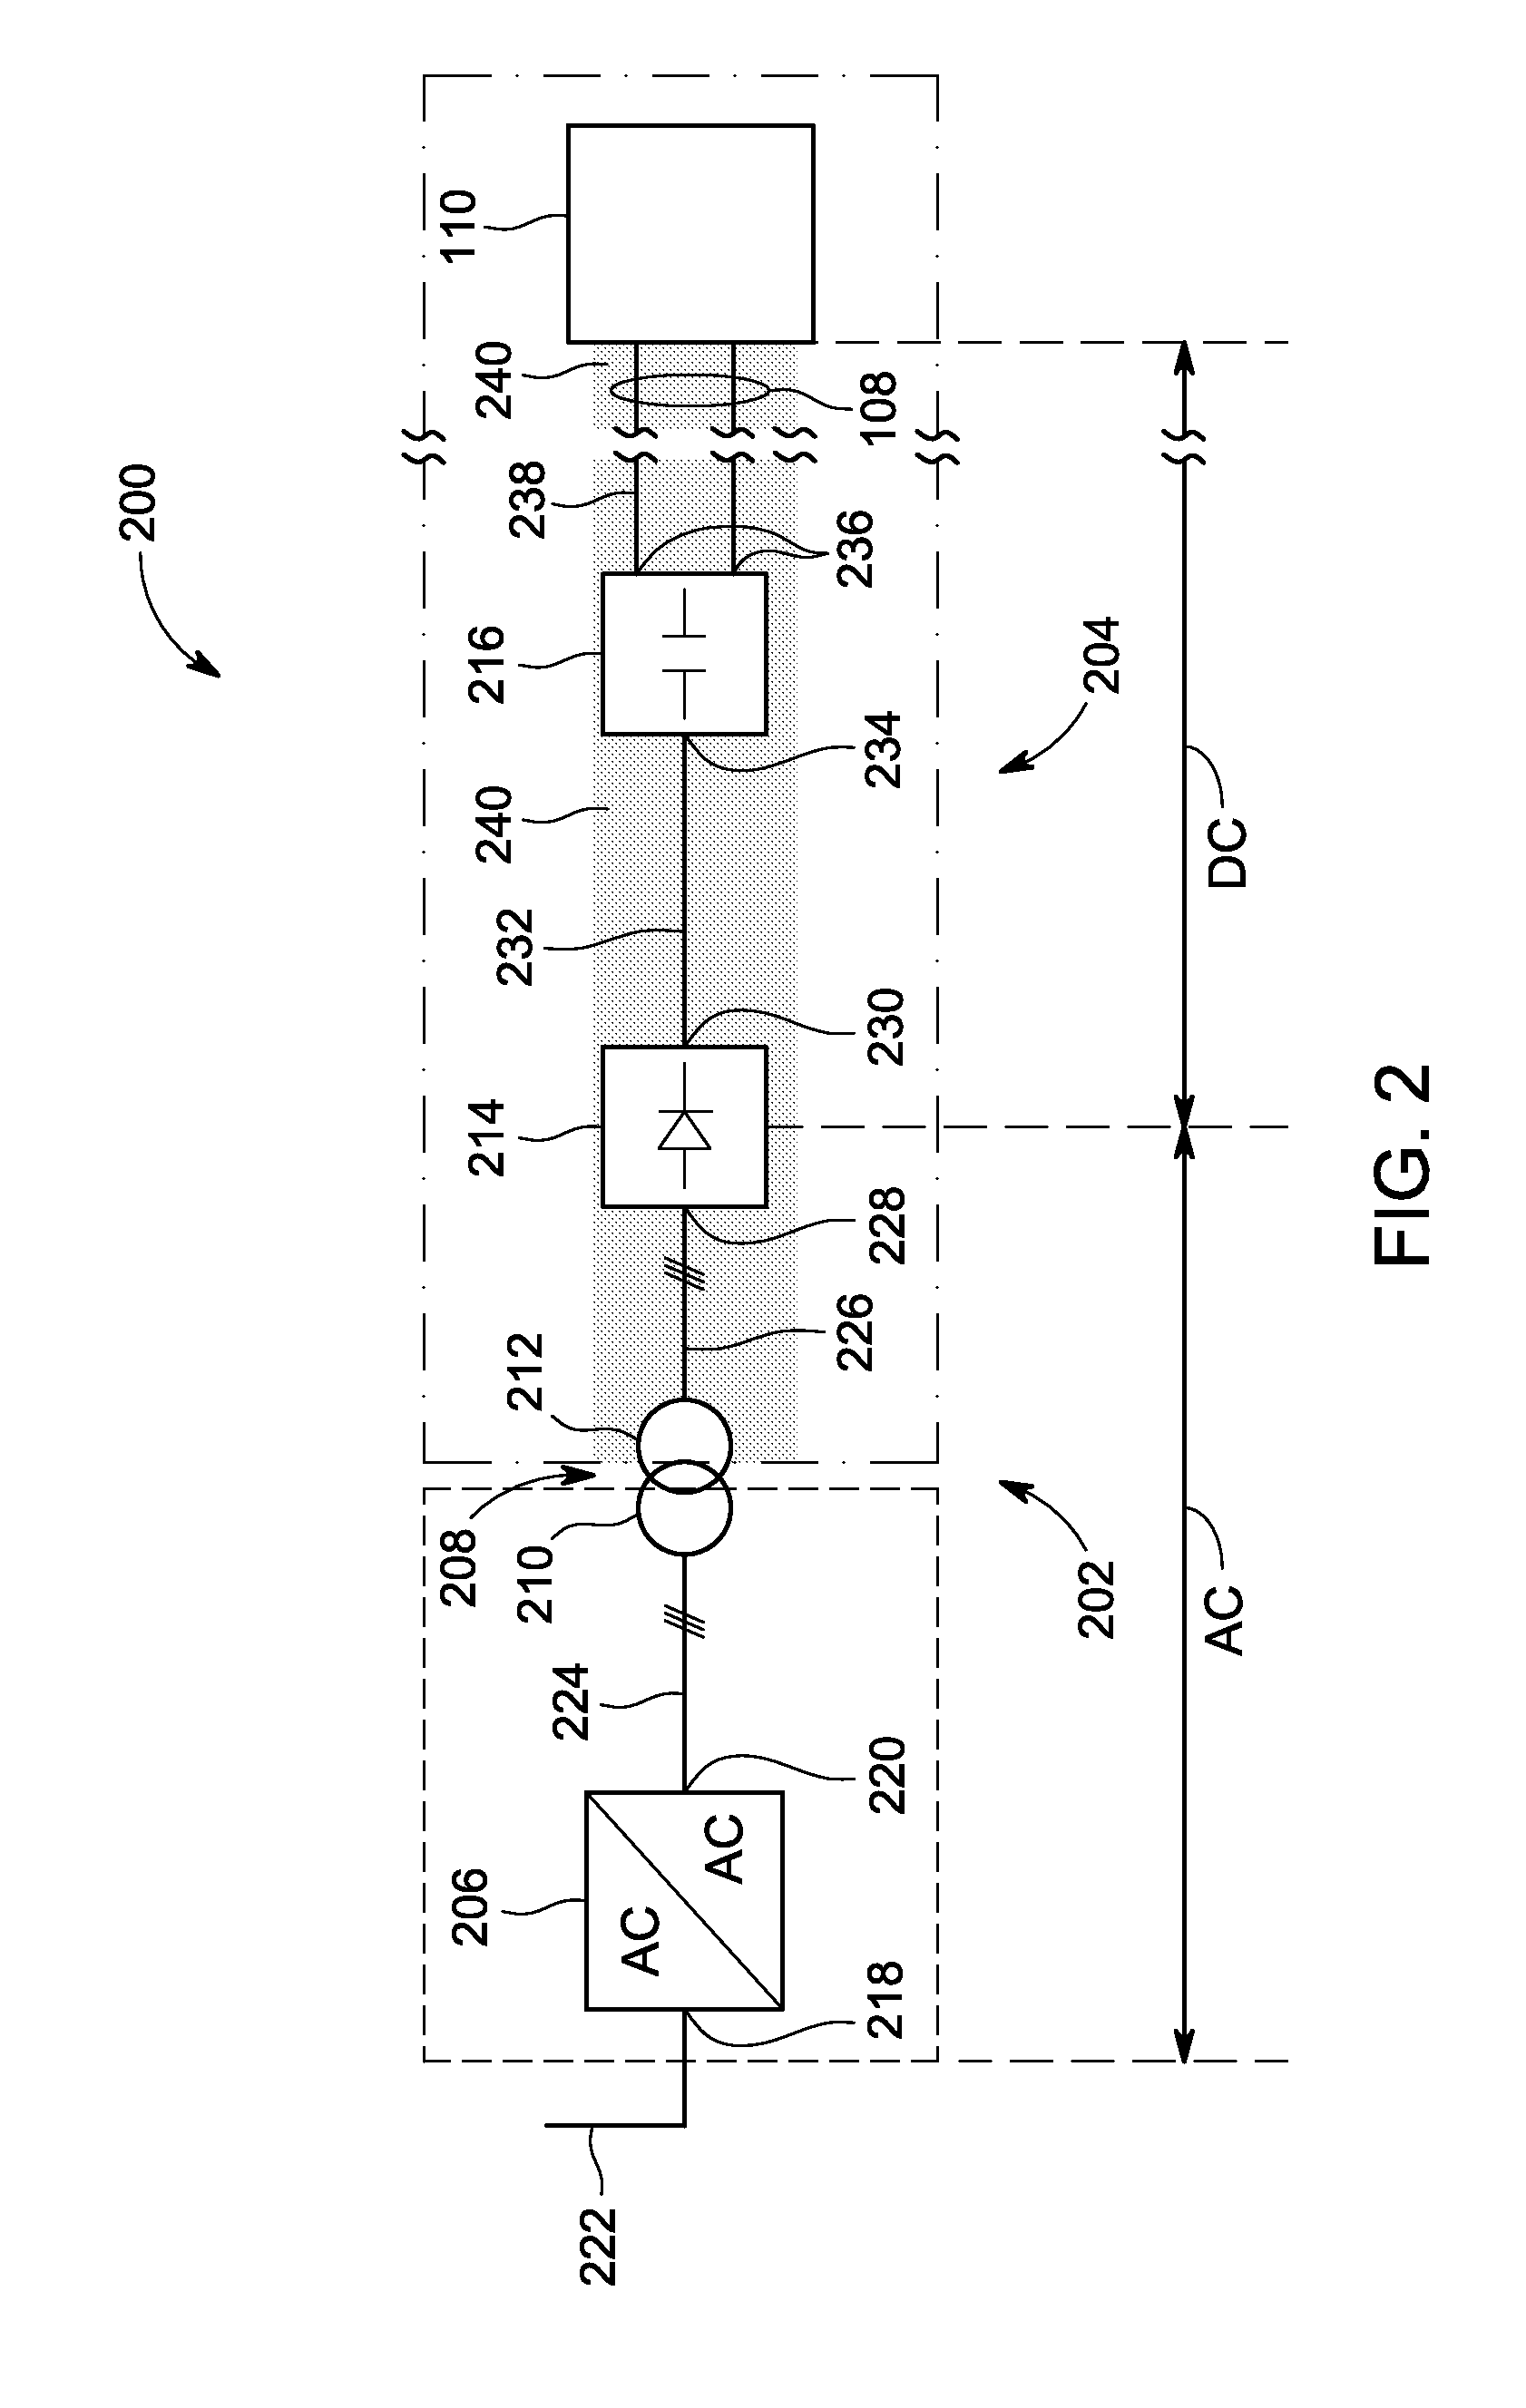 DC power transmission systems and method of assembling the same